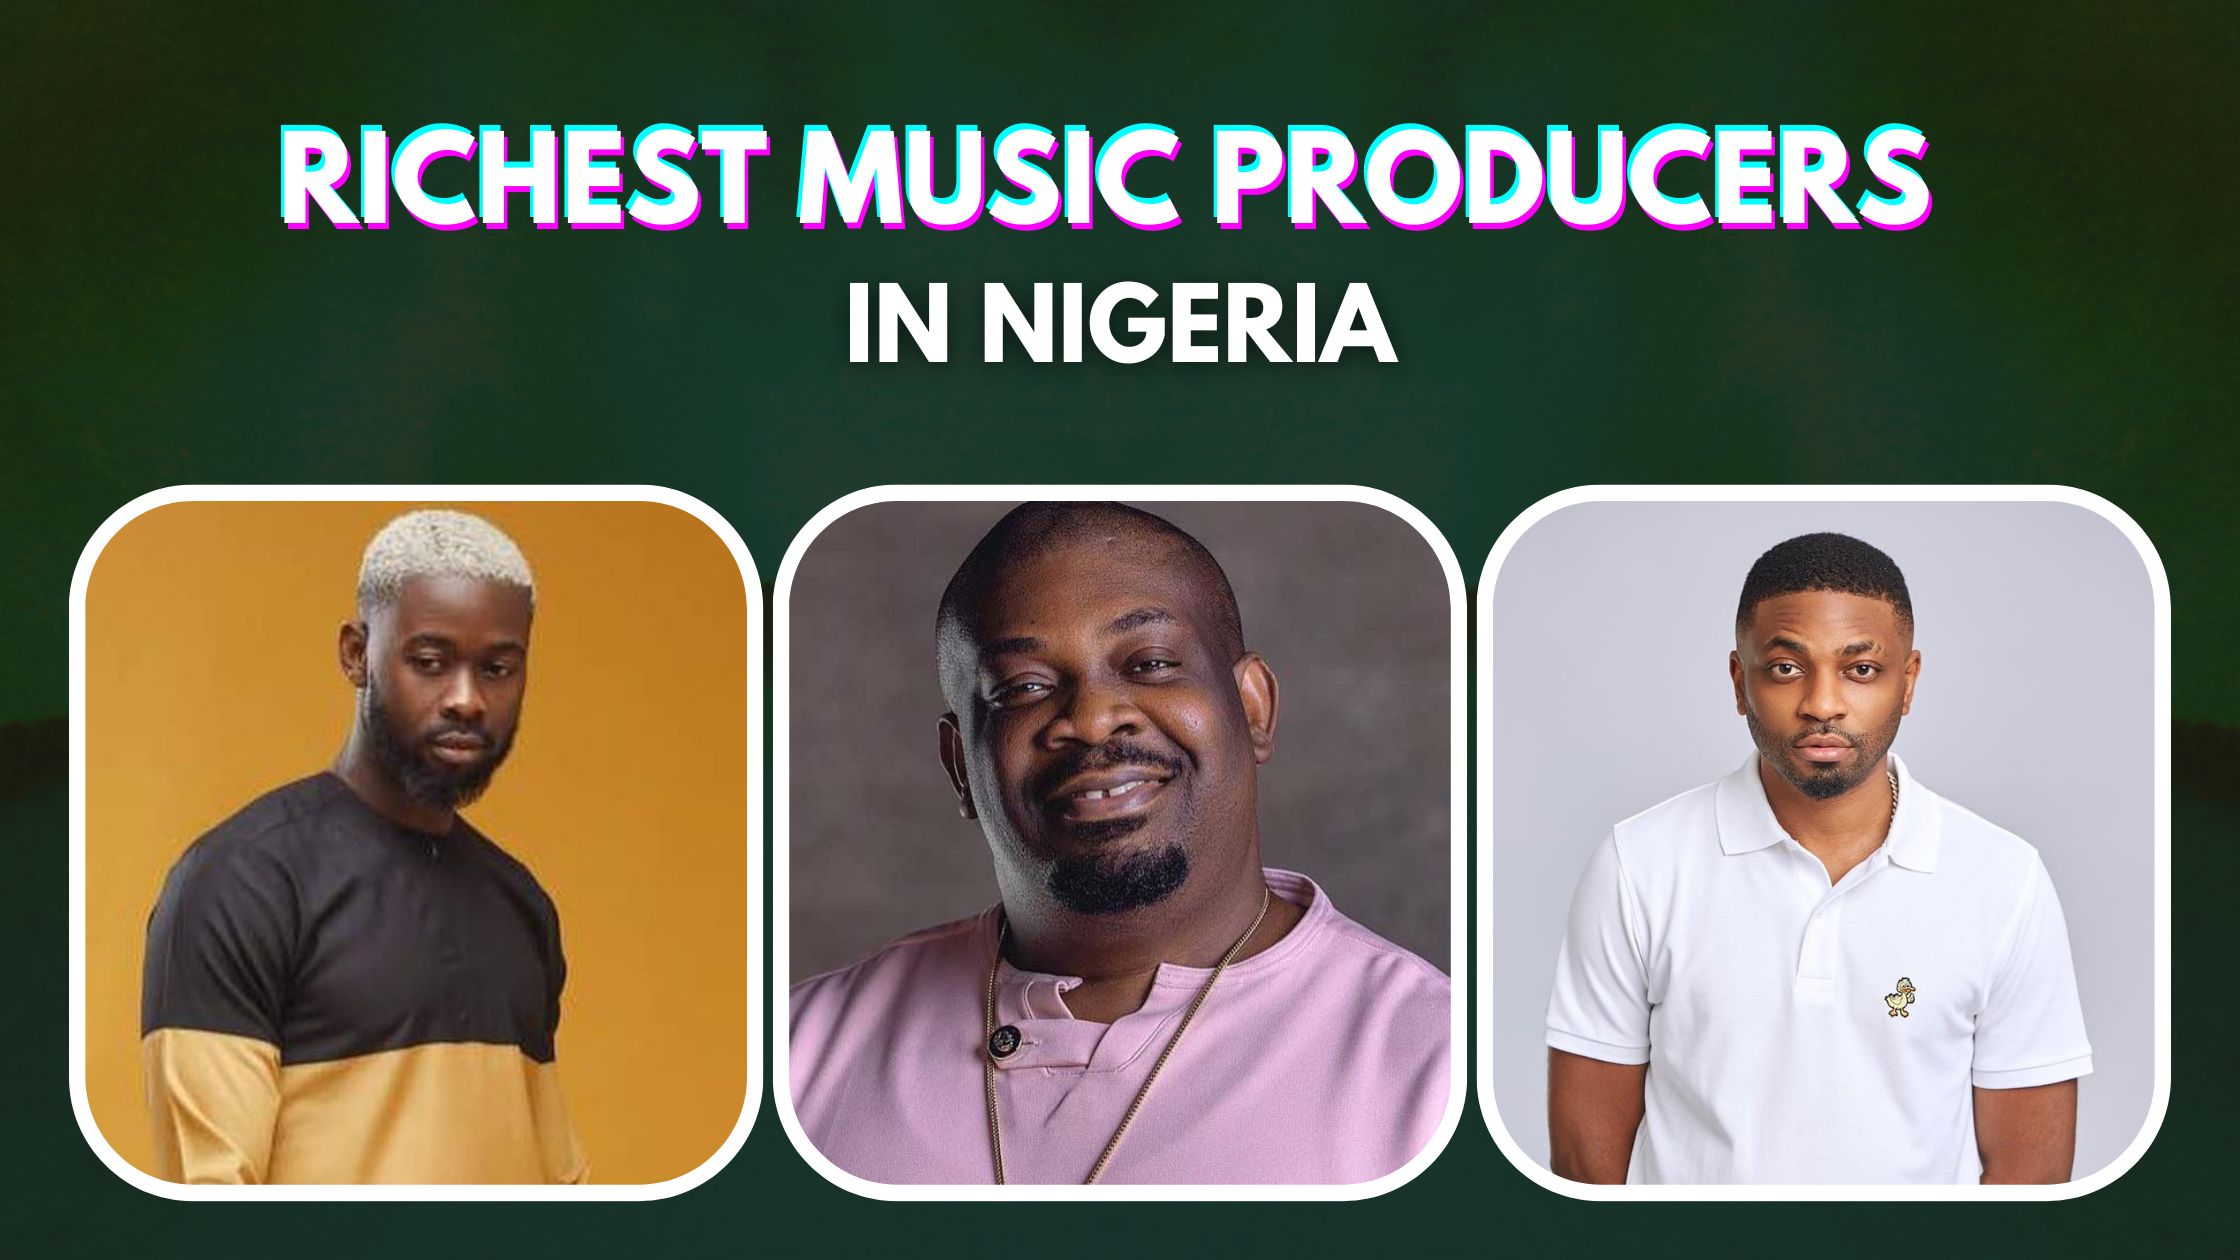 Top 10 Richest Music Producers In Nigeria